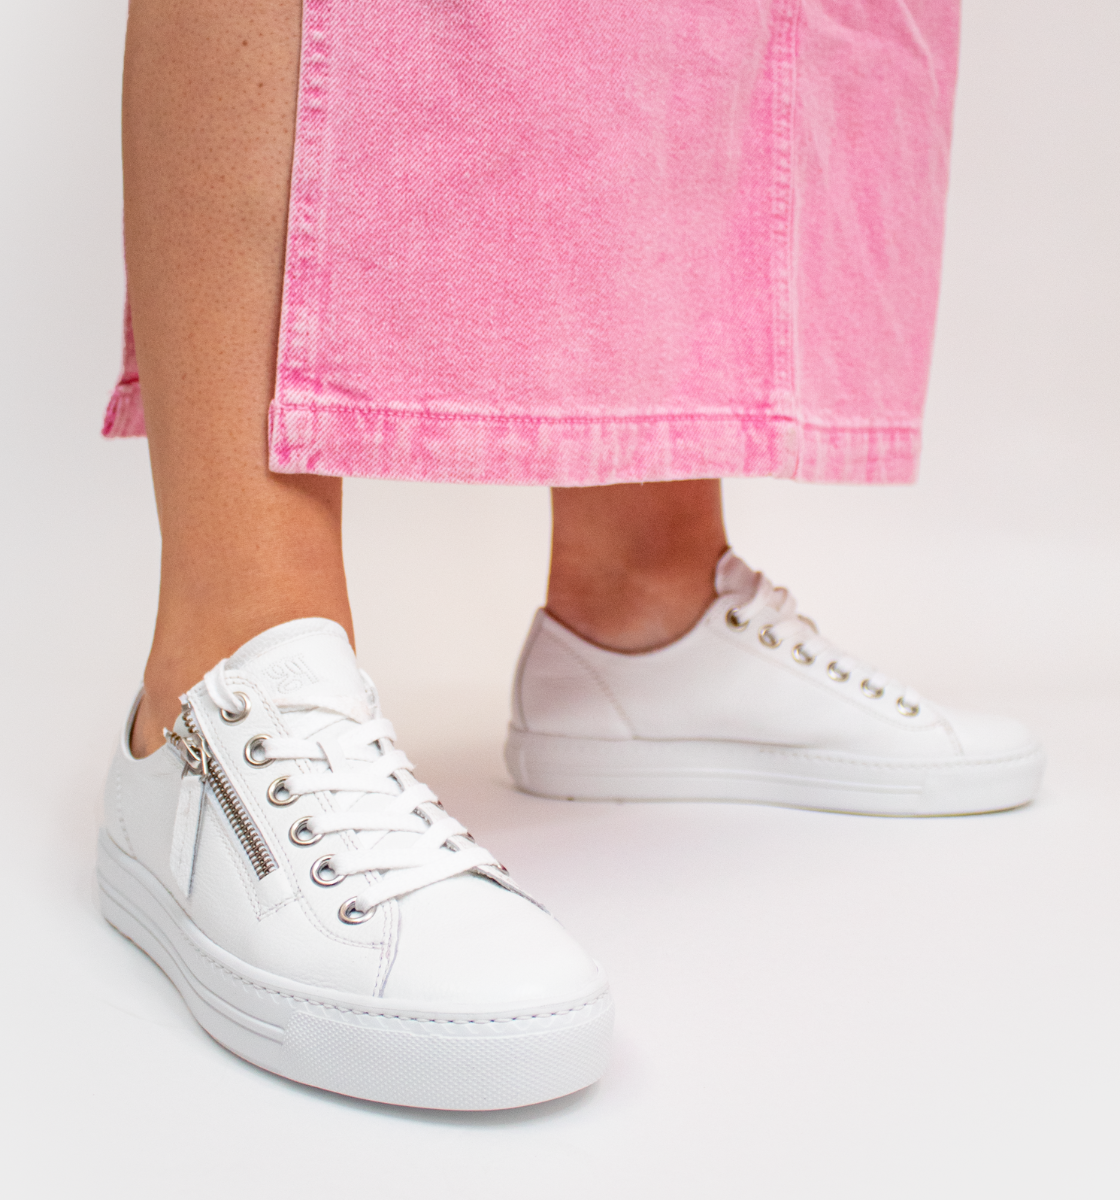 White sneakers and runners collection for Women